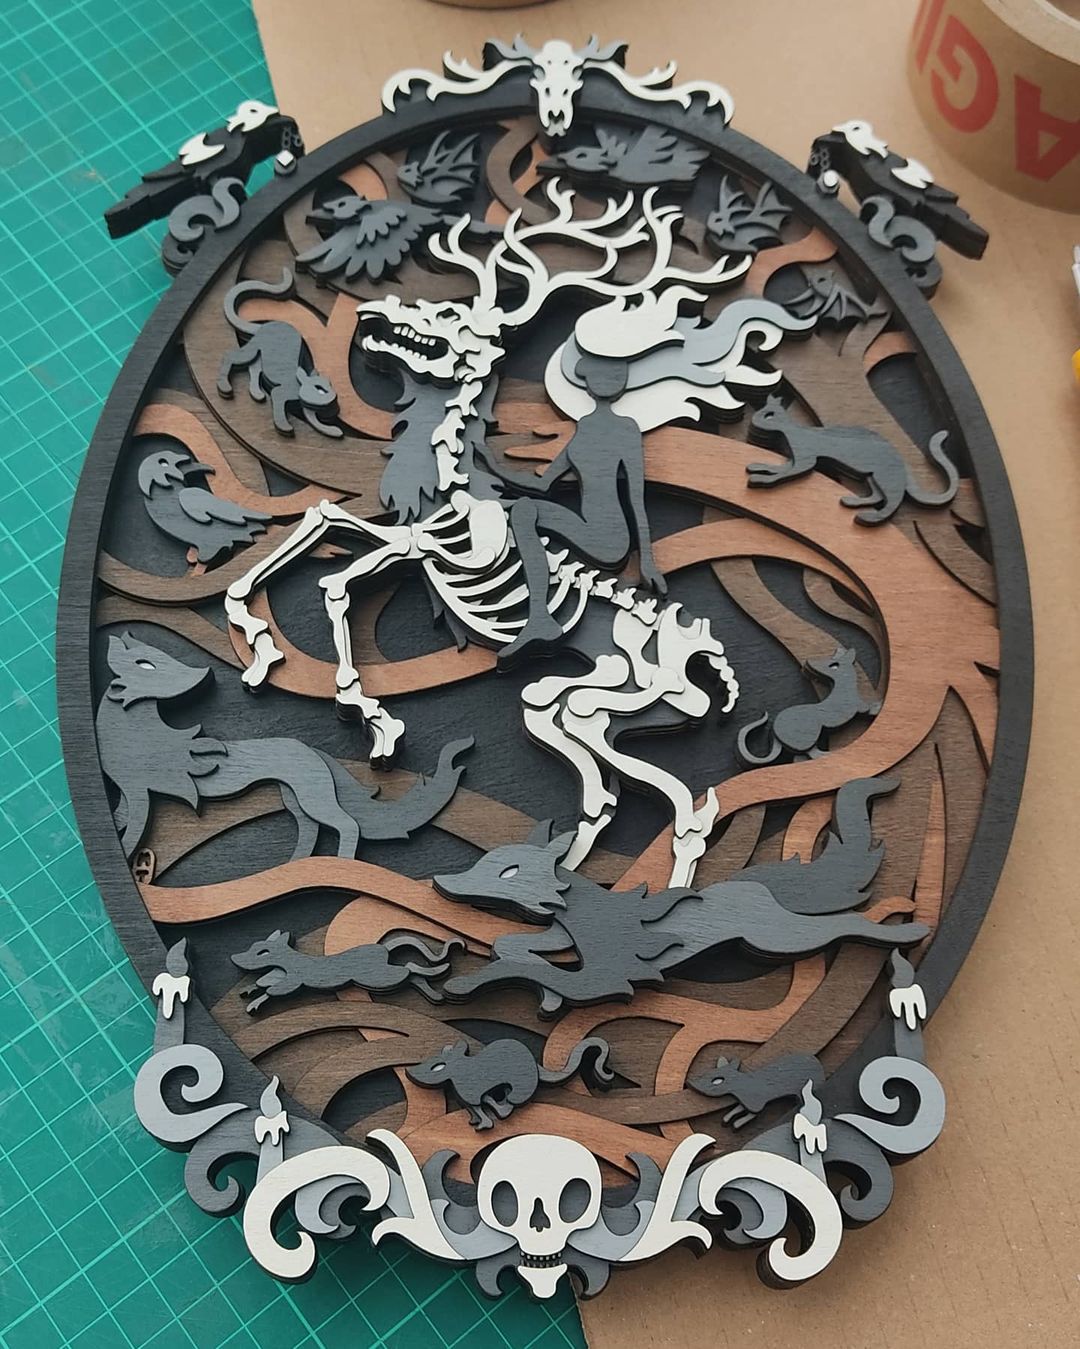 Gorgeous Multi Layered Laser Cut Wood Illustrations By Martin Tomsky 10